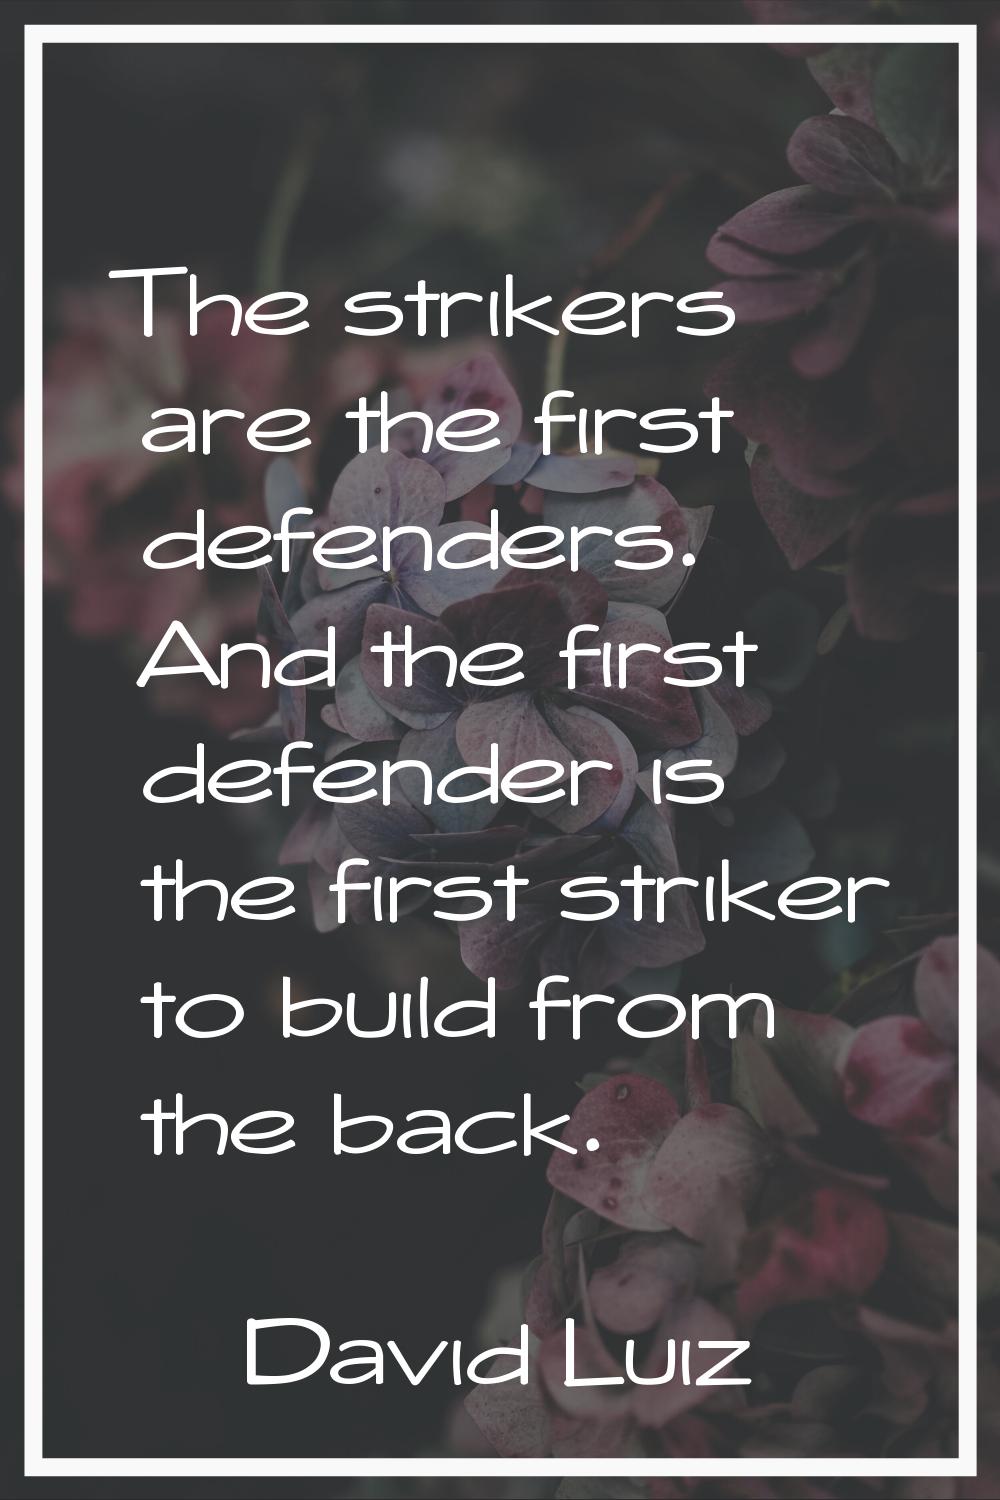 The strikers are the first defenders. And the first defender is the first striker to build from the